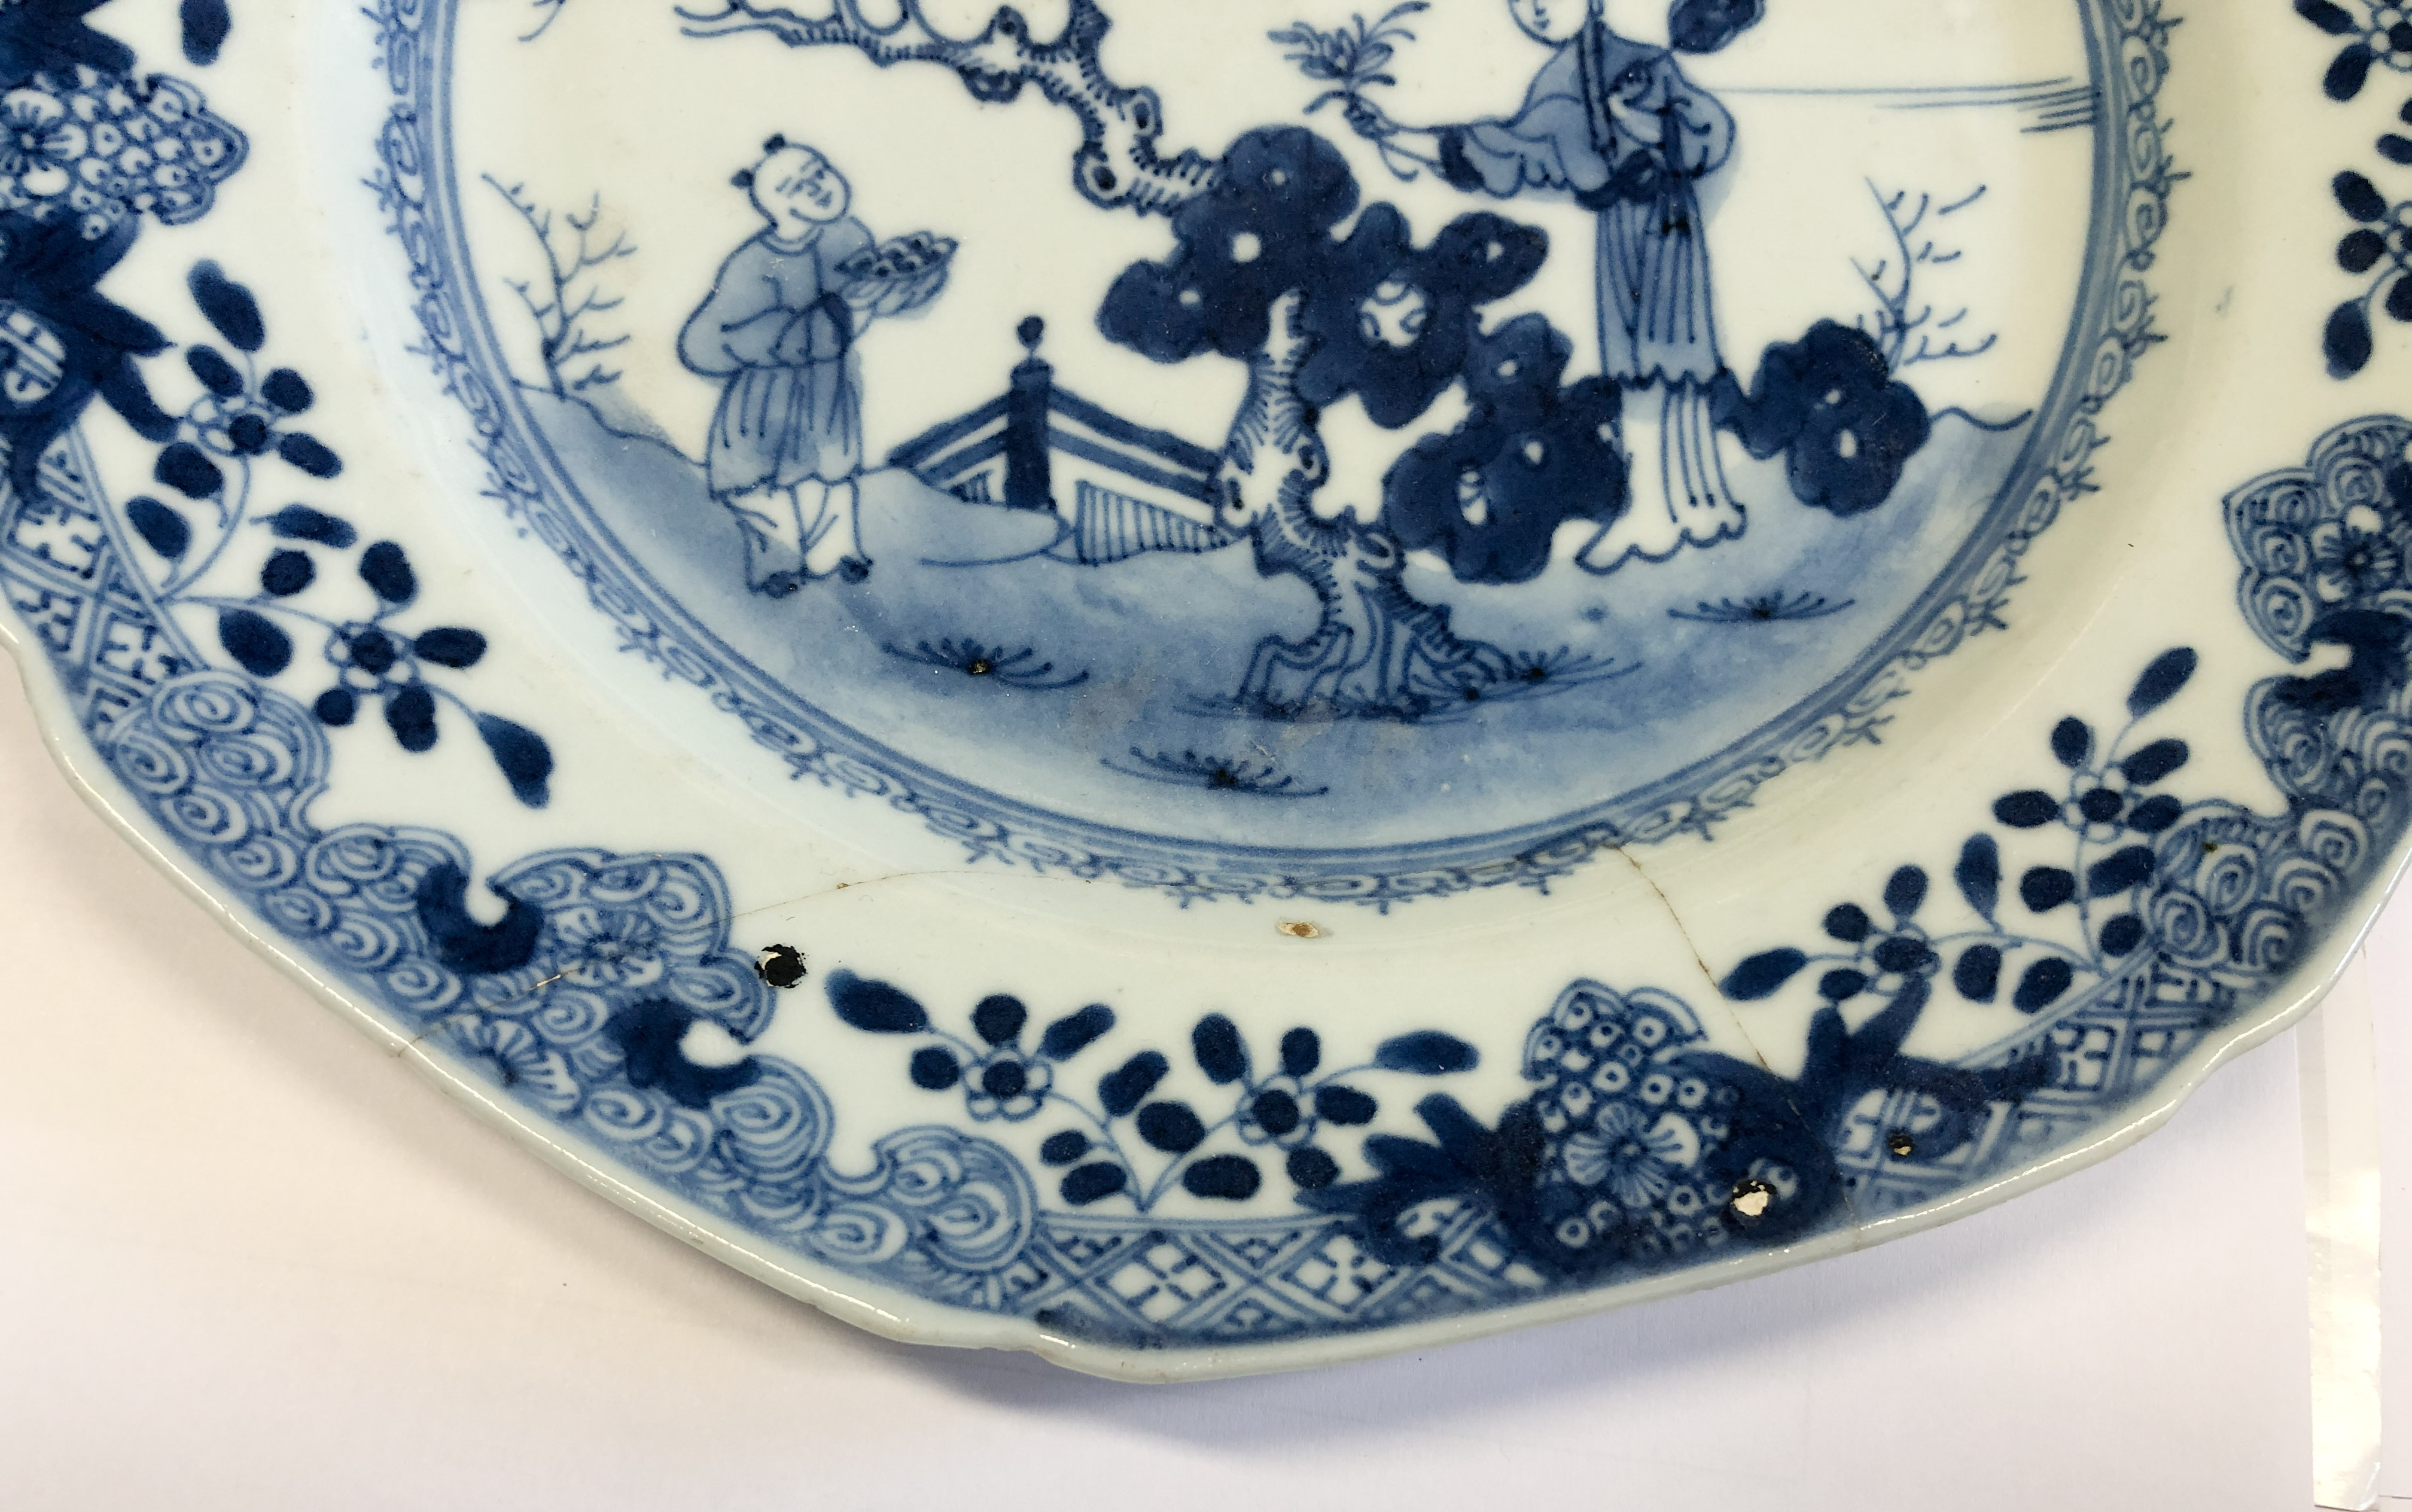 Eight Chinese export porcelain blue and white plates and octagonal platters - late 18th / early 19th - Image 29 of 31